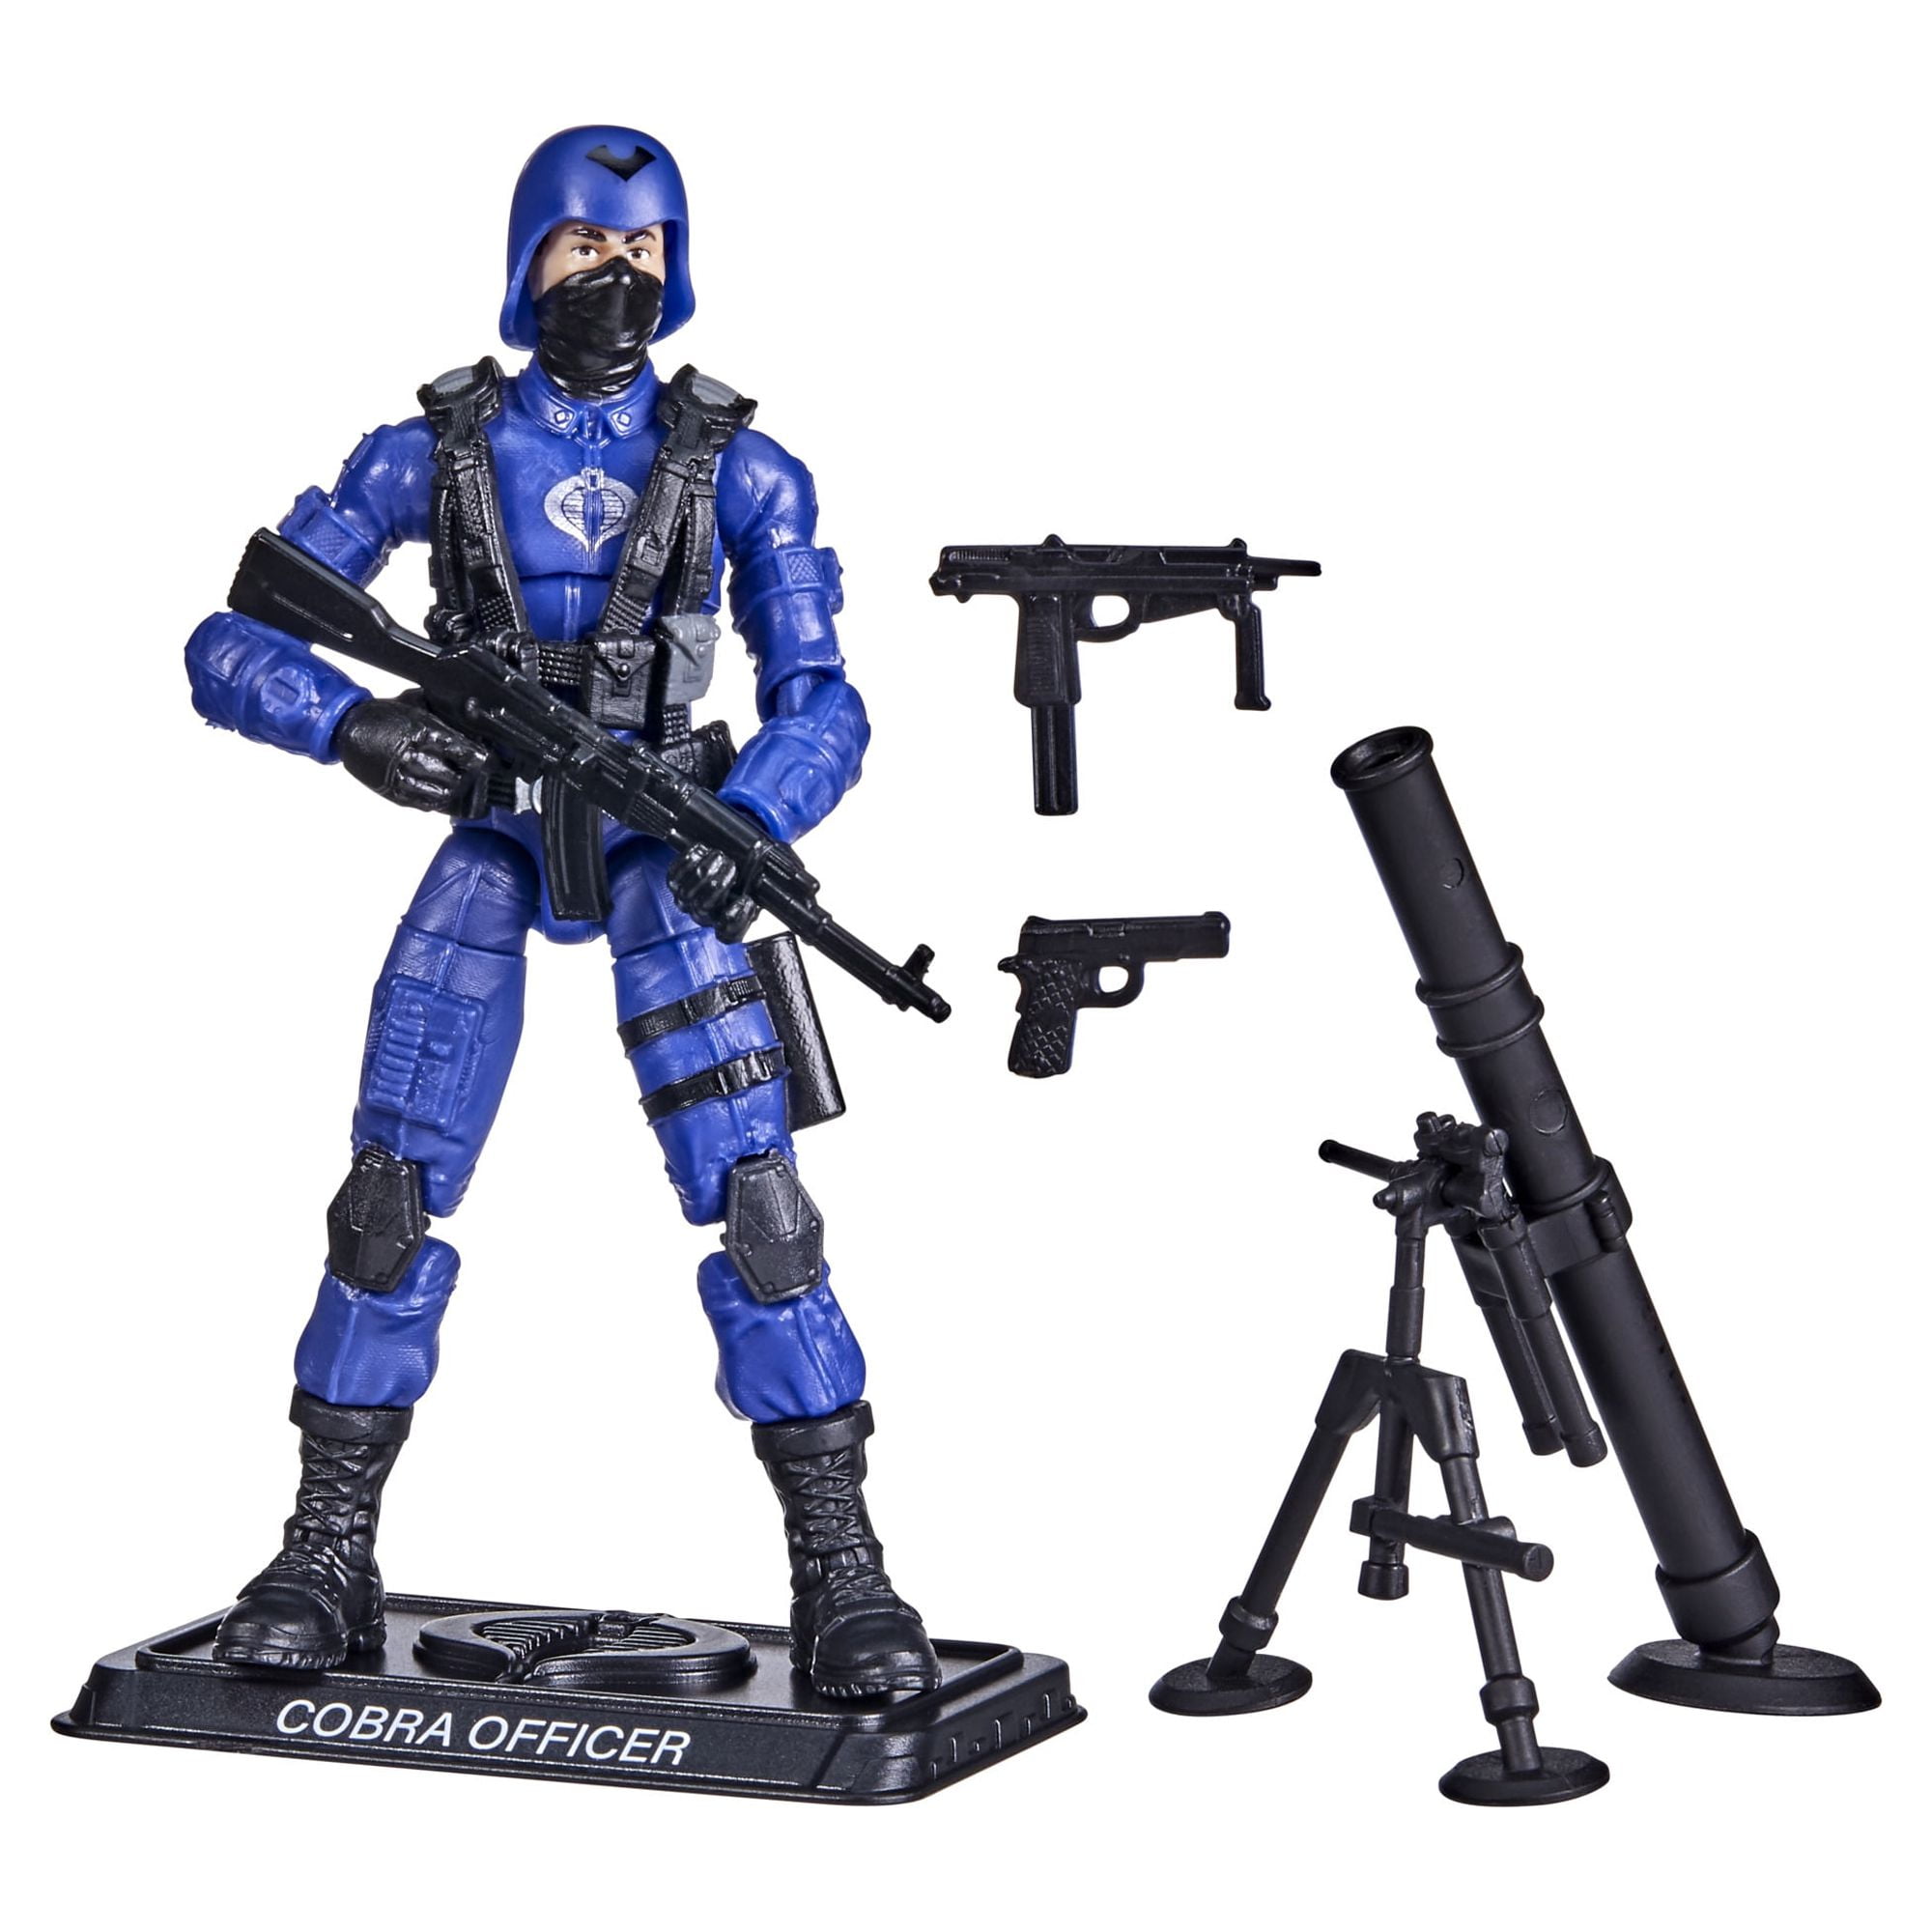 Shop GI Joe Collectibles from We-R-Toys